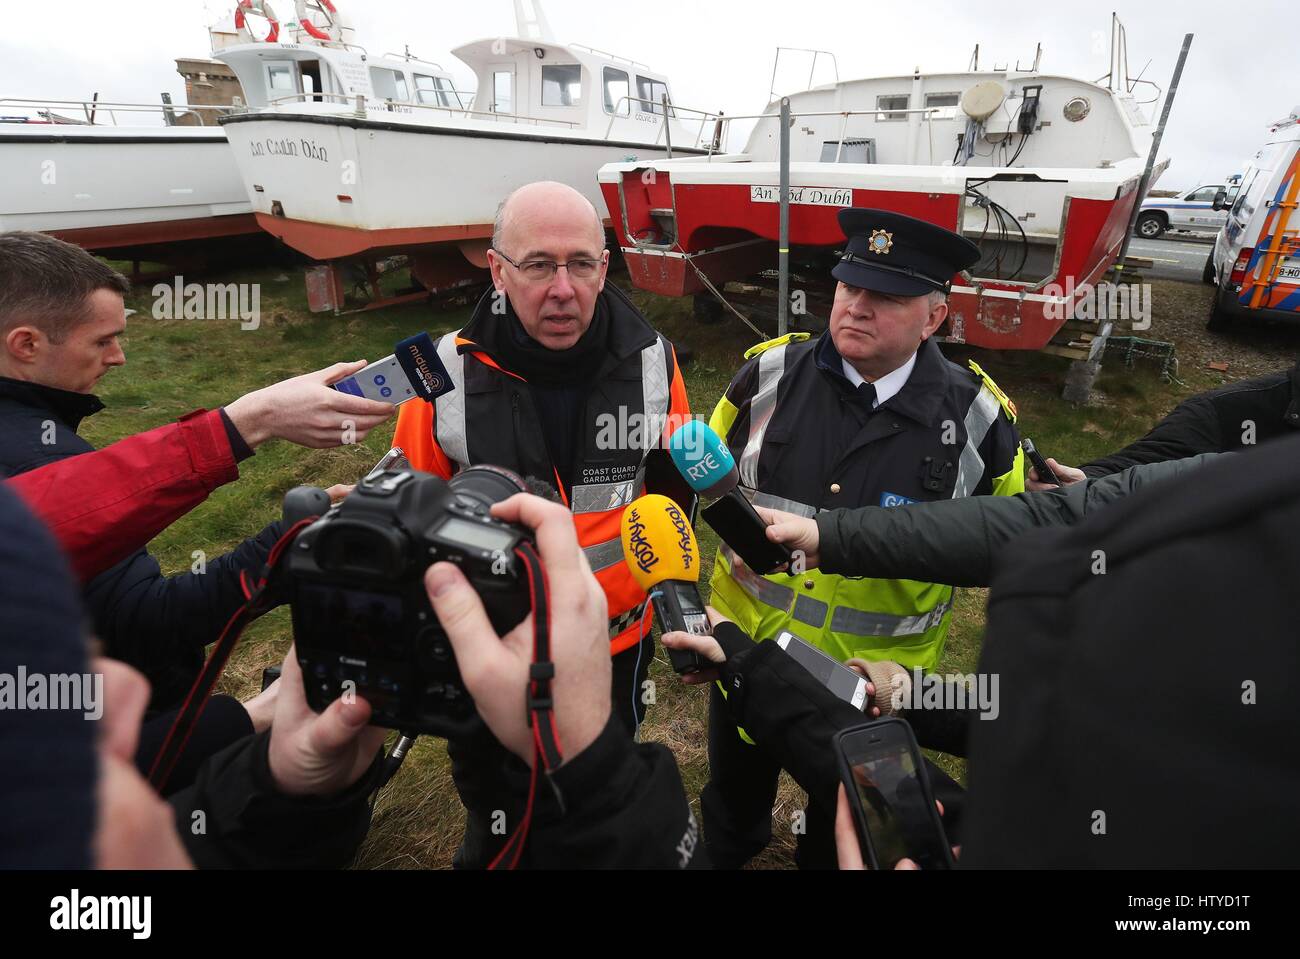 Gerard O'Flynn, the search and rescue operations manager with the Irish Coast Guard, (left) and Superintendent Tony Healy, speak to the media as the search continues for an Irish Coast Guard helicopter which went missing off the west coast of Ireland in the early hours of yesterday morning. Picture date: Wednesday March 15, 2017. See PA story IRISH Coastguard. Photo credit should read: Brian Lawless/PA Wire Stock Photo